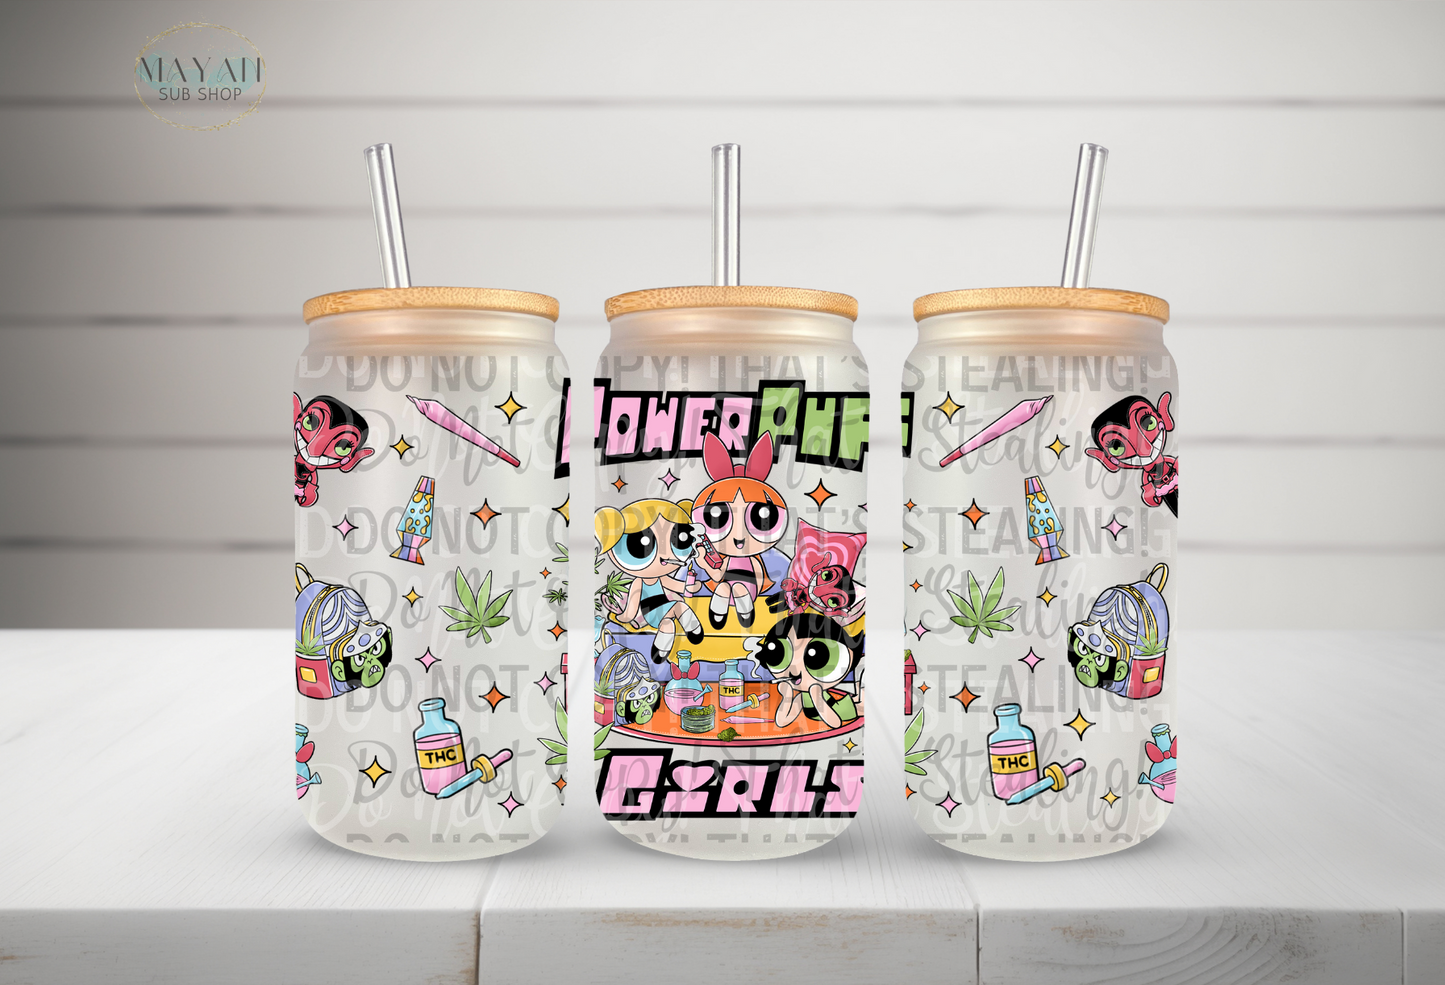 Puff girls frosted glass can. -Mayan Sub Shop